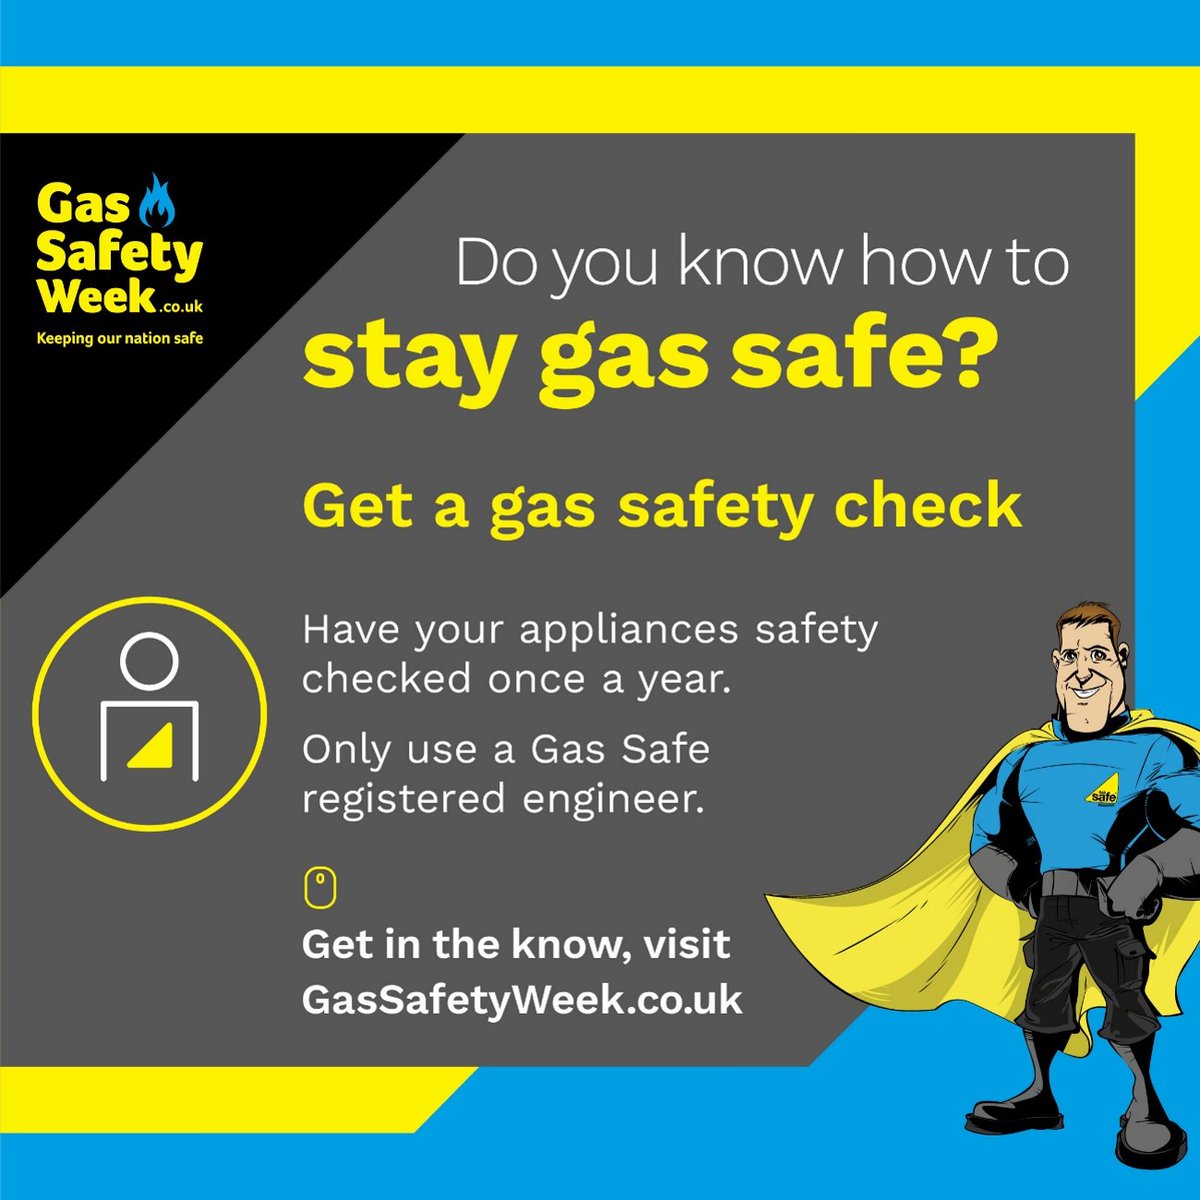 Ensure your gas appliances are checked yearly by a Gas Safe registered engineer. If you are a customer of WH, our contactors from Dodd Group organise your annual gas safety check with you. More tips 👇 wolverhamptonhomes.org.uk/gsw23/ #GSW23 #GasSafetyWeek